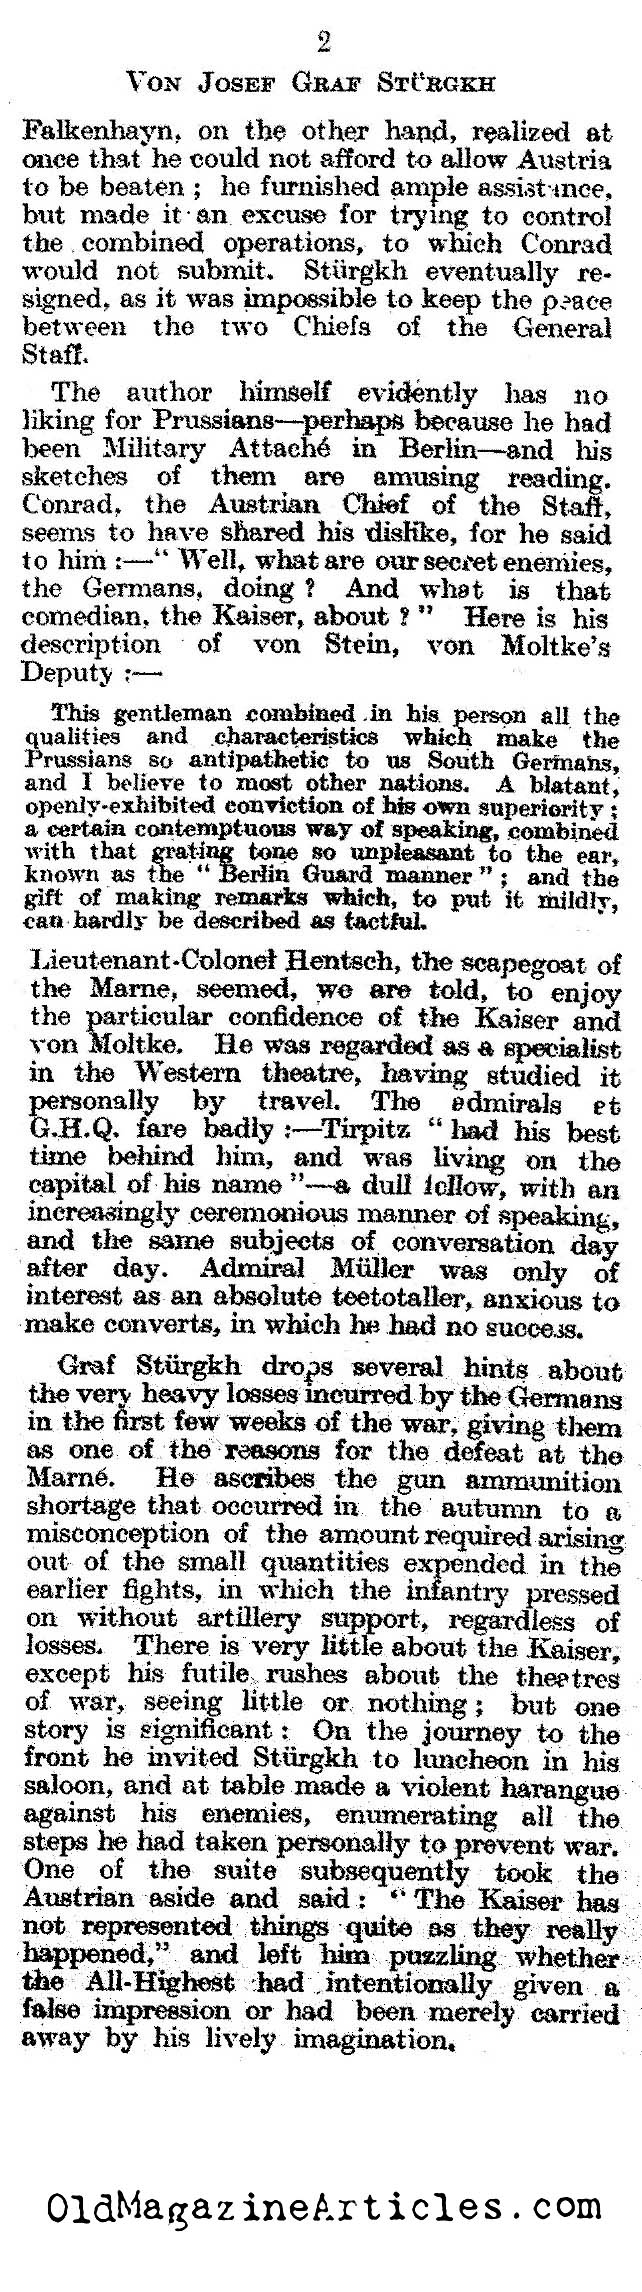 An Austrian at the German Supreme Headquarters (Times Literary Supplement, 1921)